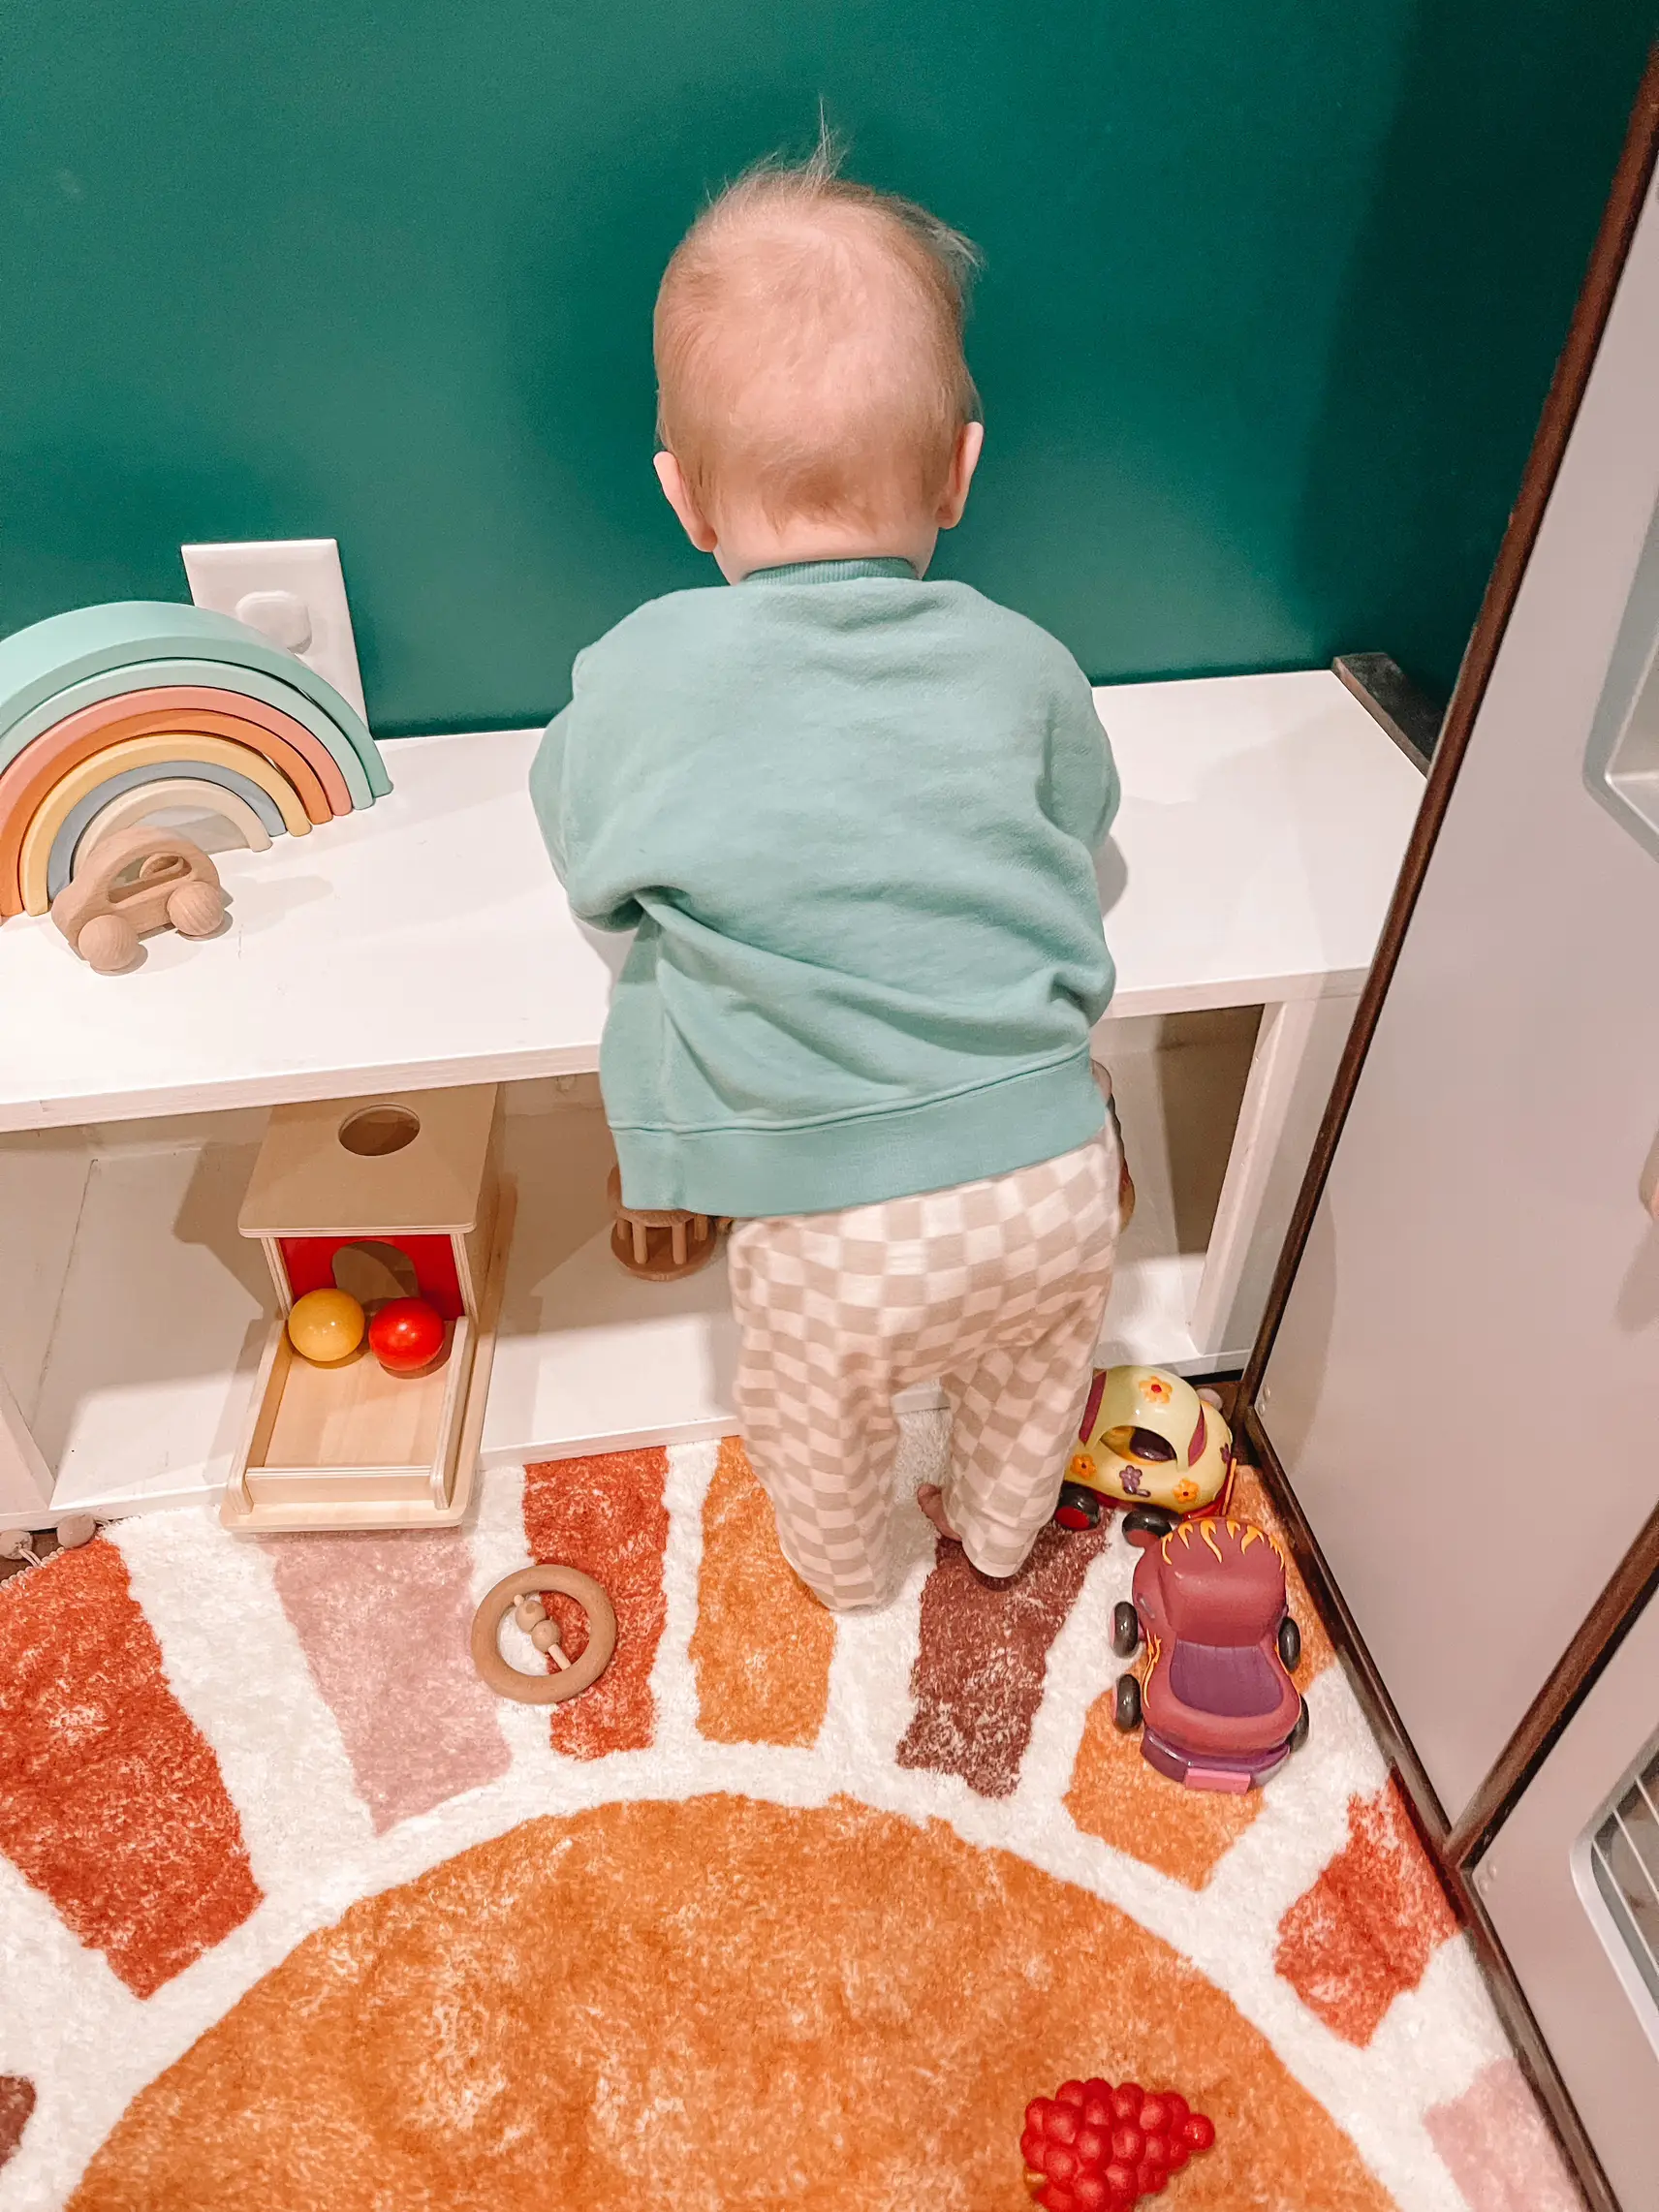 Wooden kitchen, Montessori style play corner, Gallery posted by Maycie